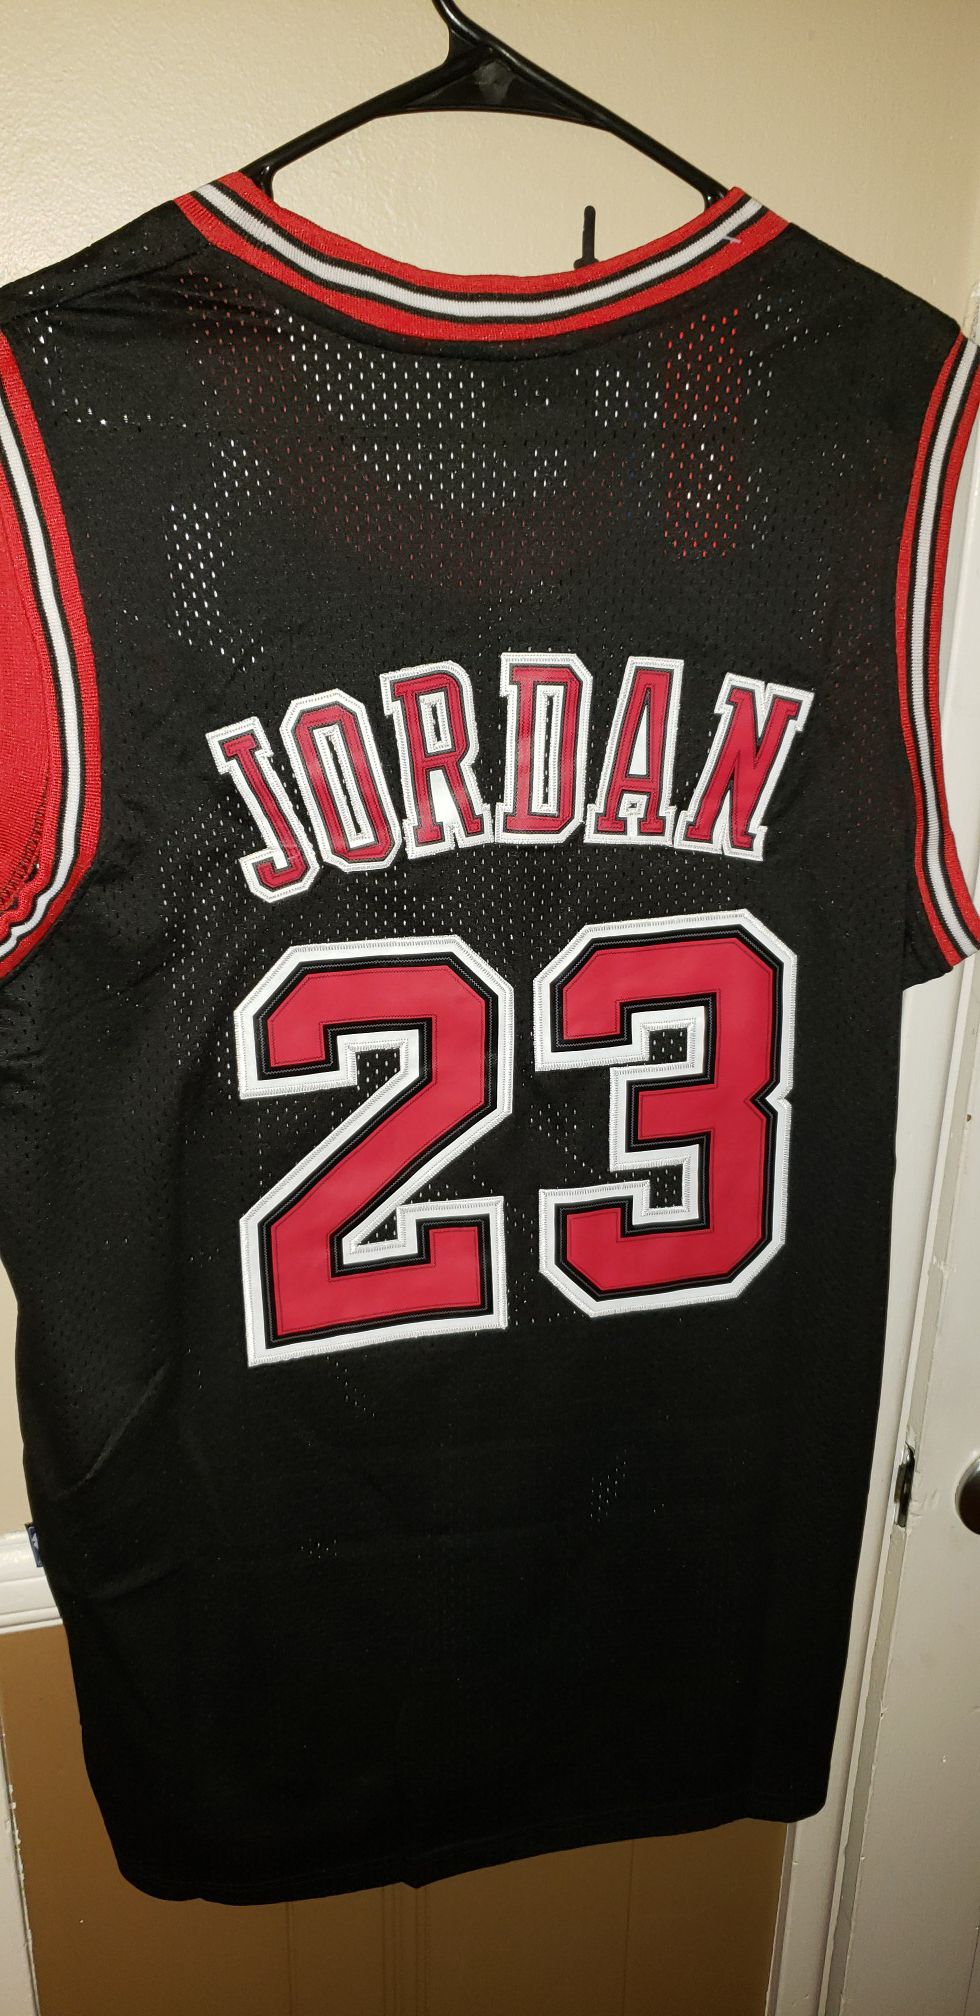 Men's Large Michael Jordan Chicago Bulls Jersey New with Tags Stiched Nike $45. Ships +$3. Pick up in West Covina